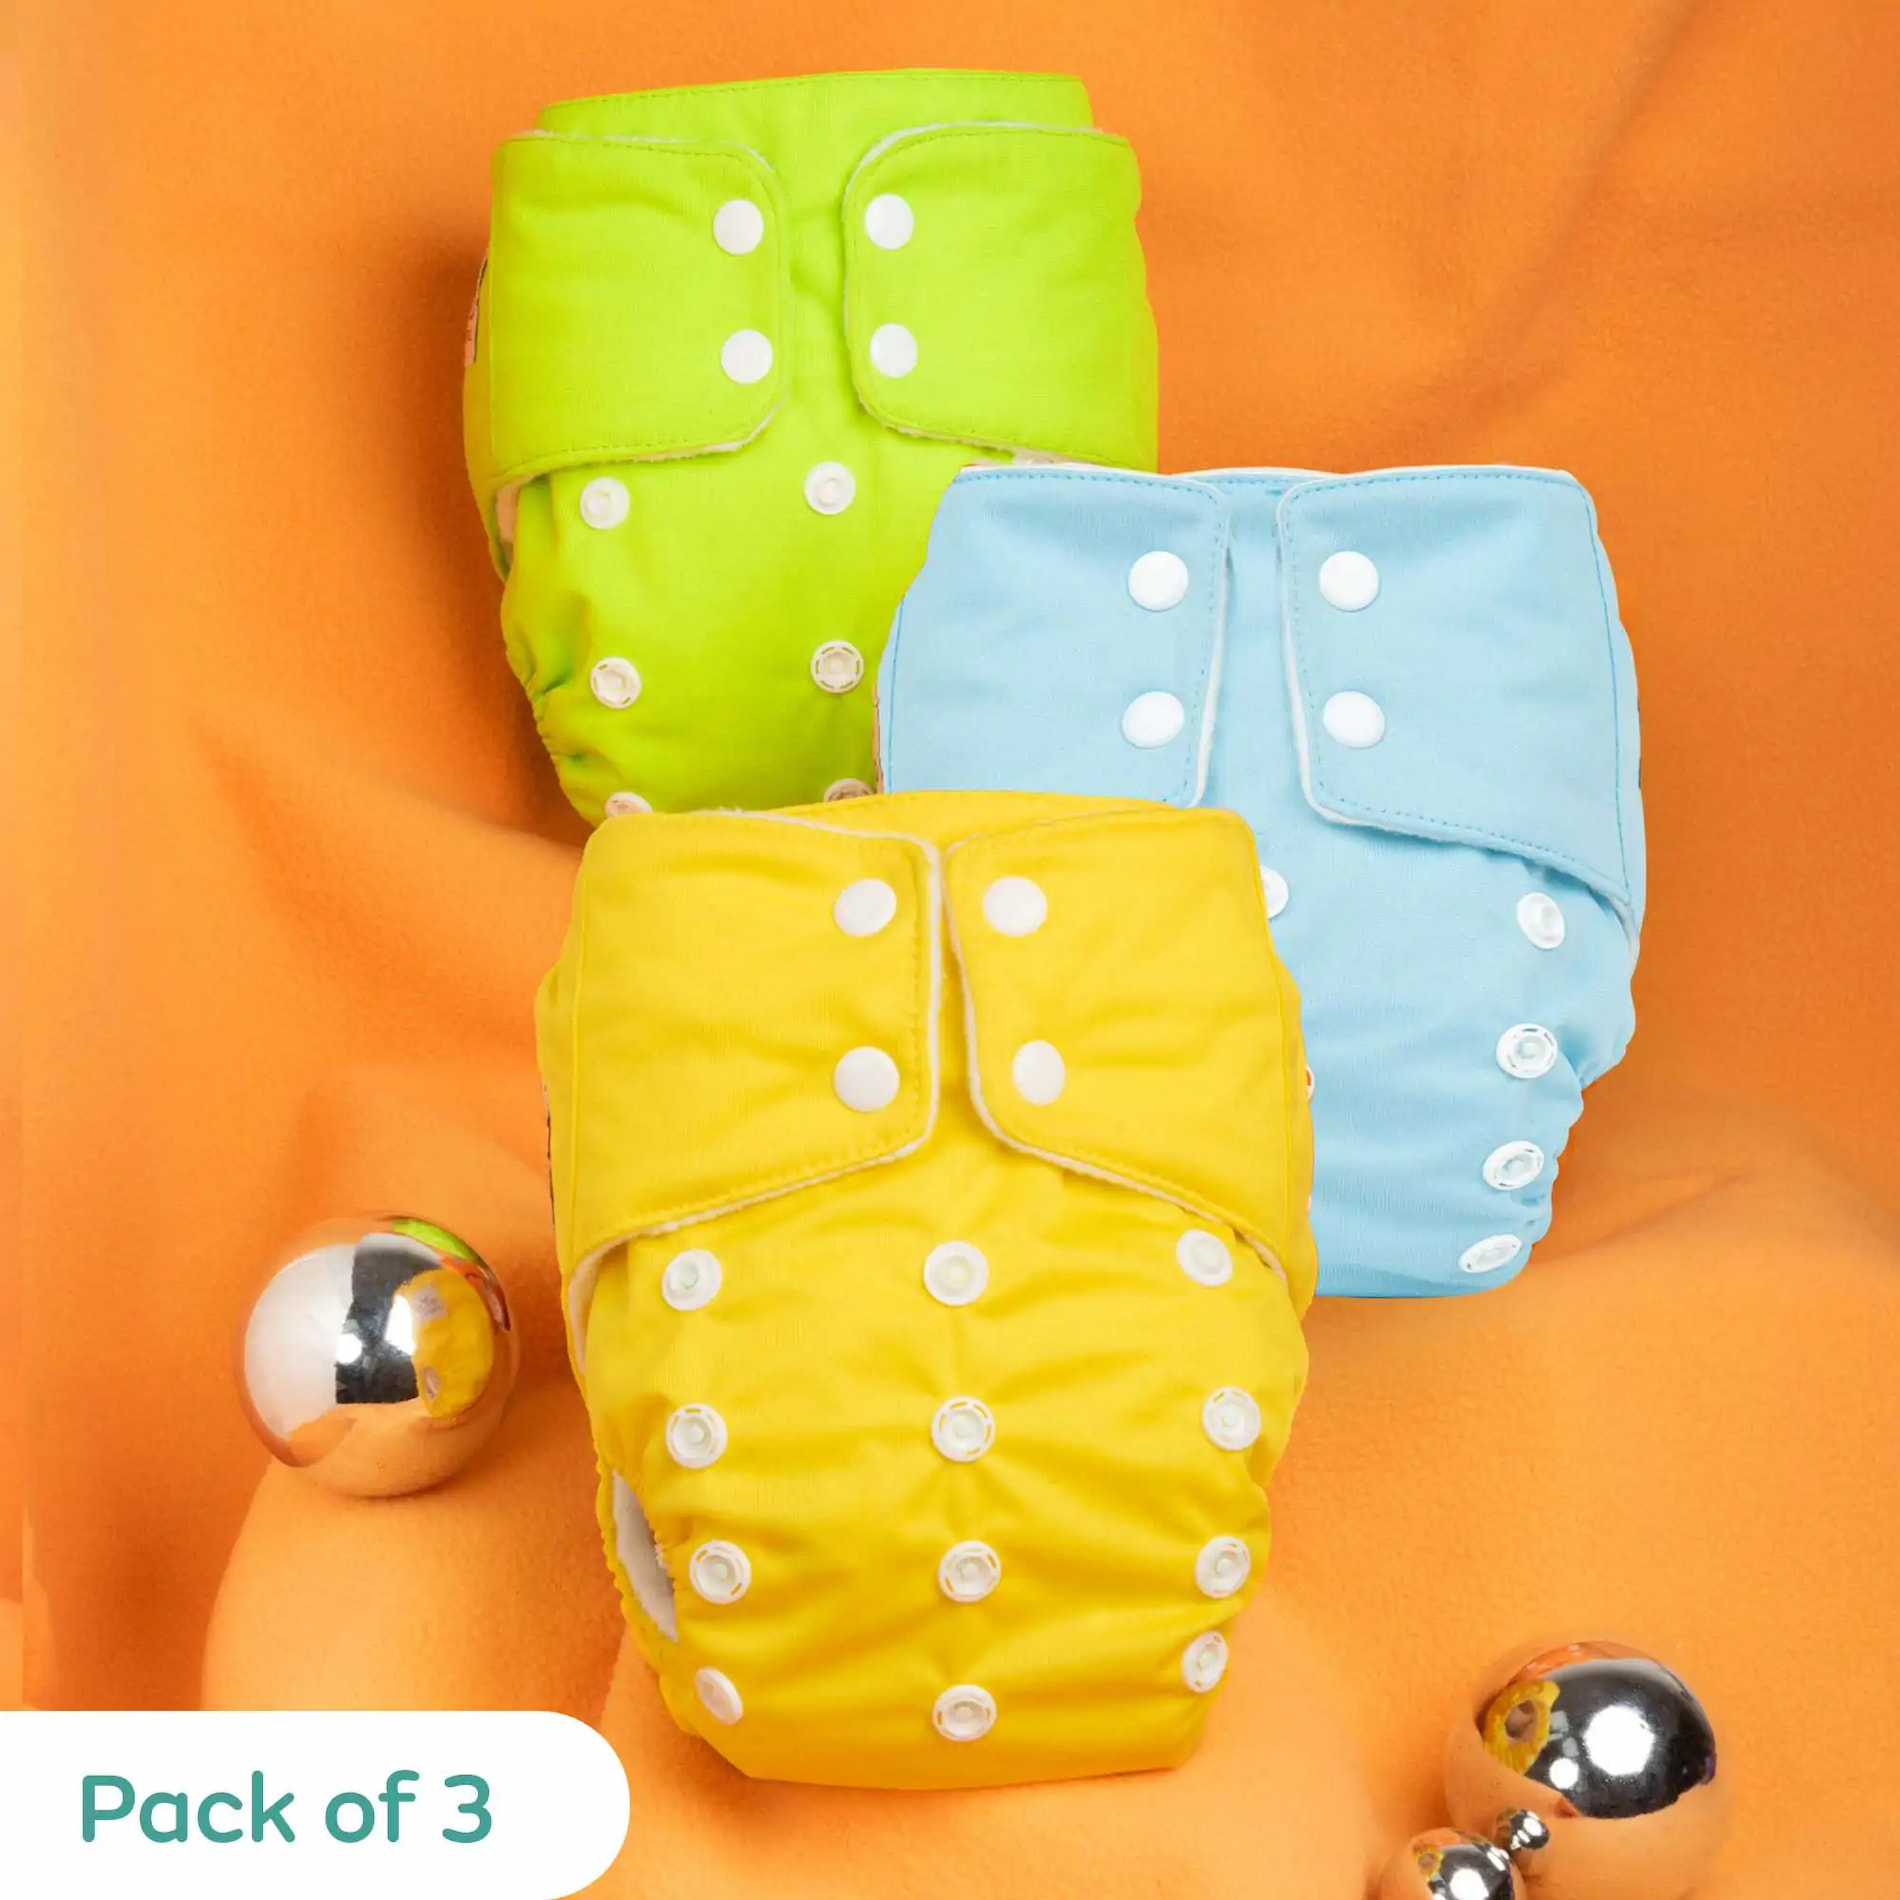 Adjustable & Reusable Cloth Diaper - Yellow, Green & Blue - Pack of 3